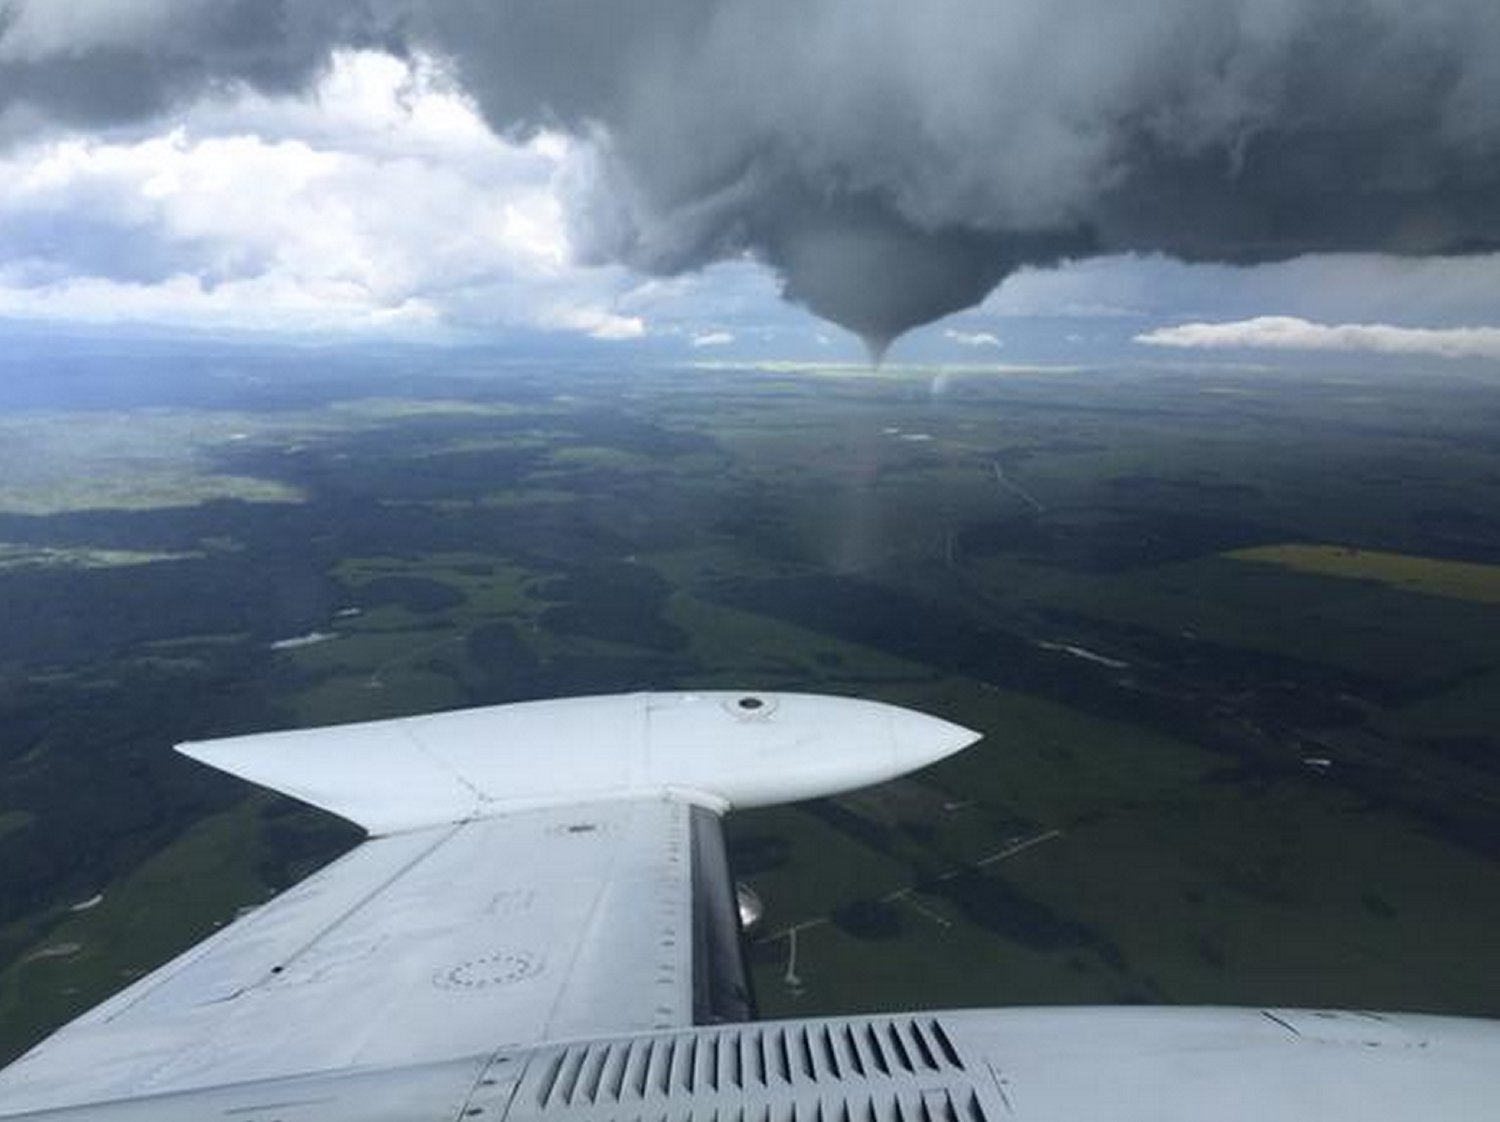 The tornado near Priddis, AB as seen from air by cloud seeders. (Source: Twitter - @Ringosmyuncle)